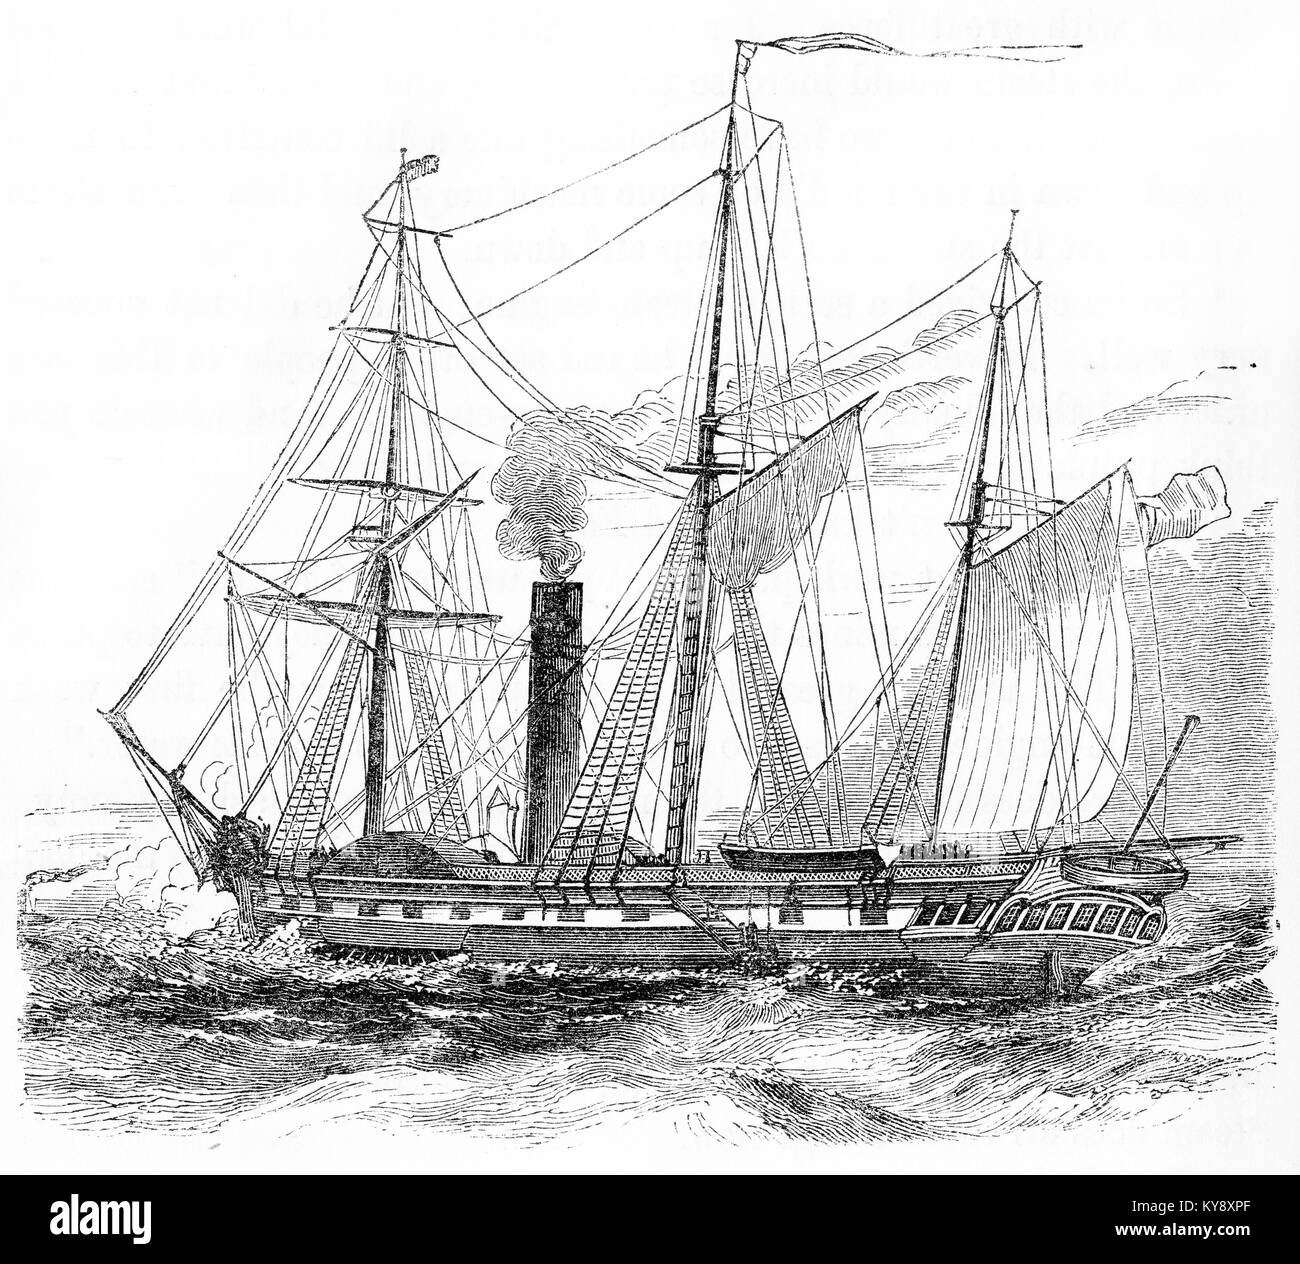 Engraving of a sailing ship equipped with steam boilers during the Victorian era. From an original engraving in the Harper's Story Books by Jacob Abbott, 1854. Stock Photo